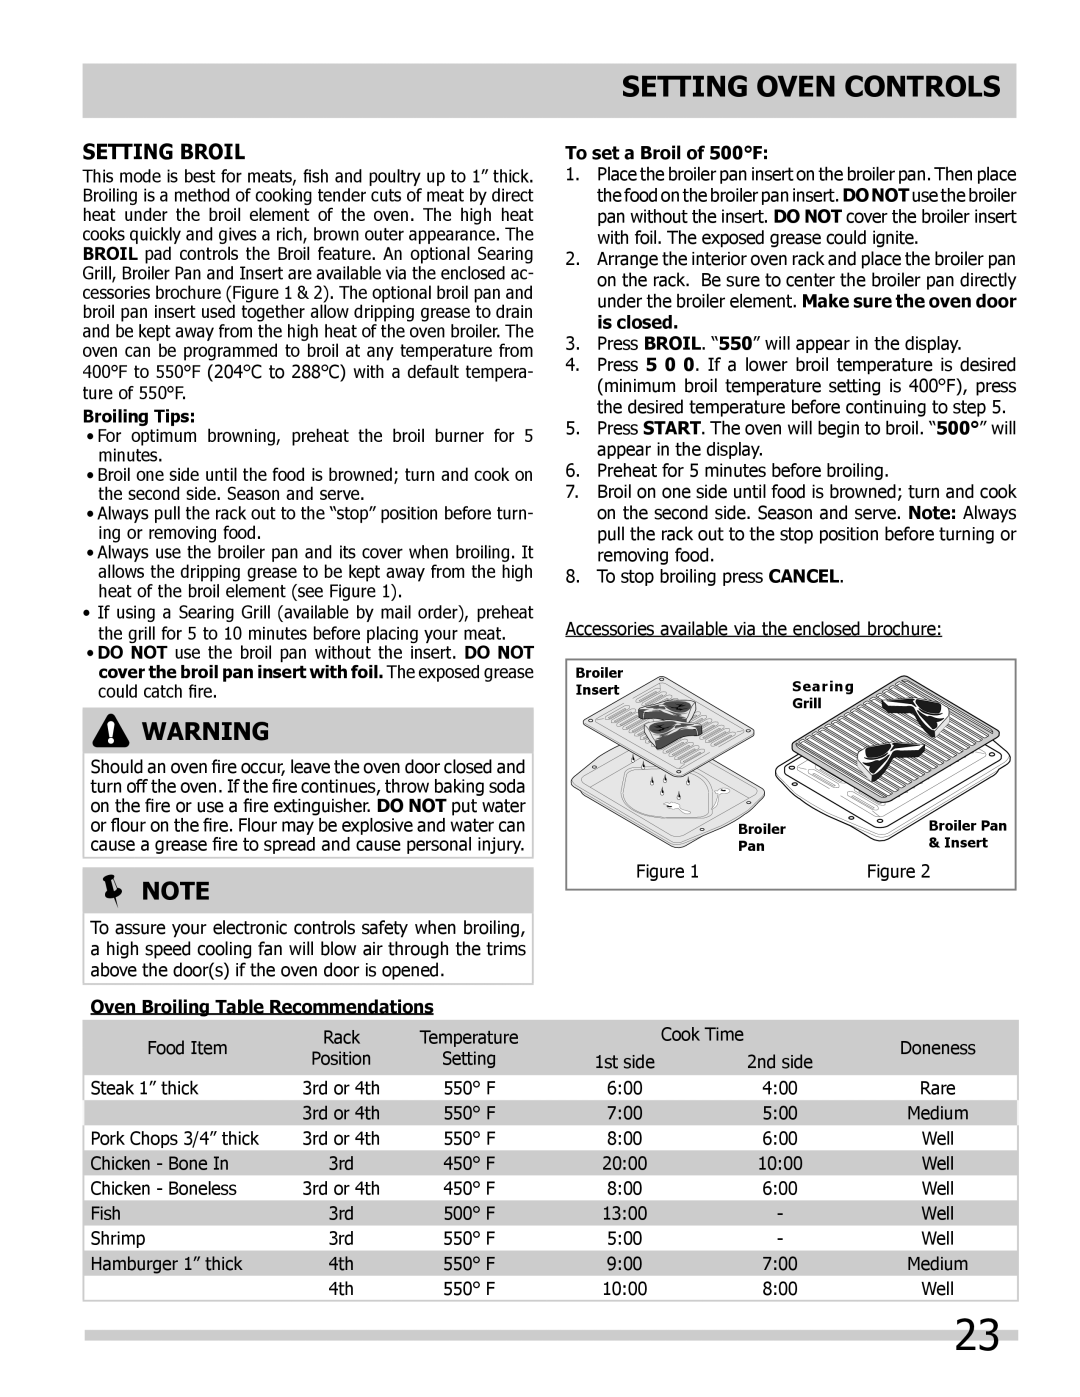 Frigidaire 318205852 Setting Broil, Broiling Tips, Oven Broiling Table Recommendations, To set a Broil of 500F,  Note 